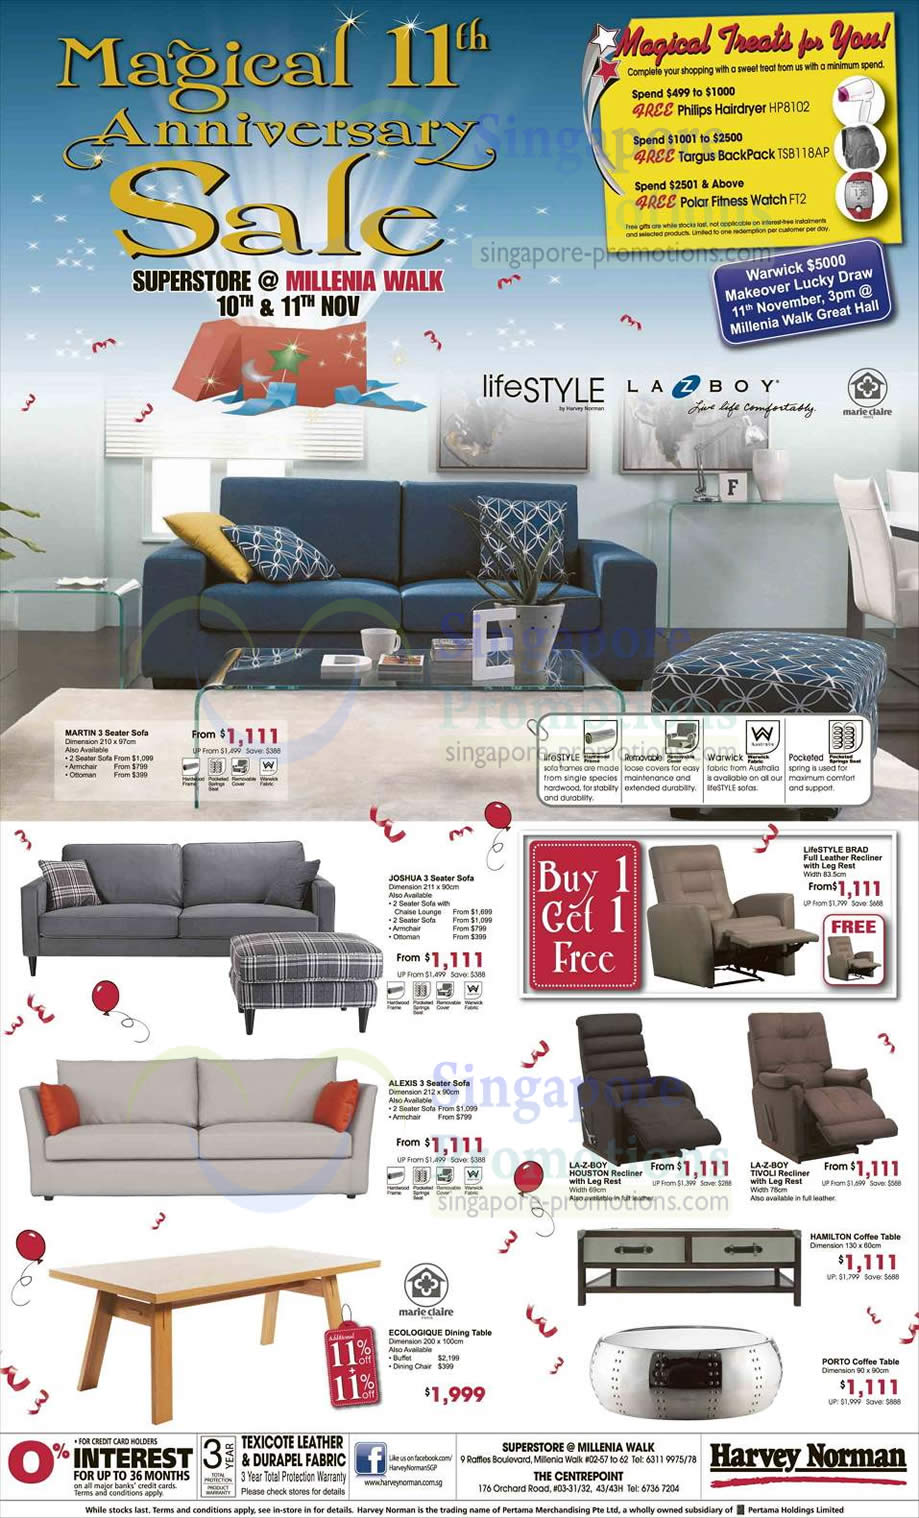 Featured image for Harvey Norman Digital Cameras, Furniture, Notebooks & Appliances Offers 10 - 11 Nov 2012